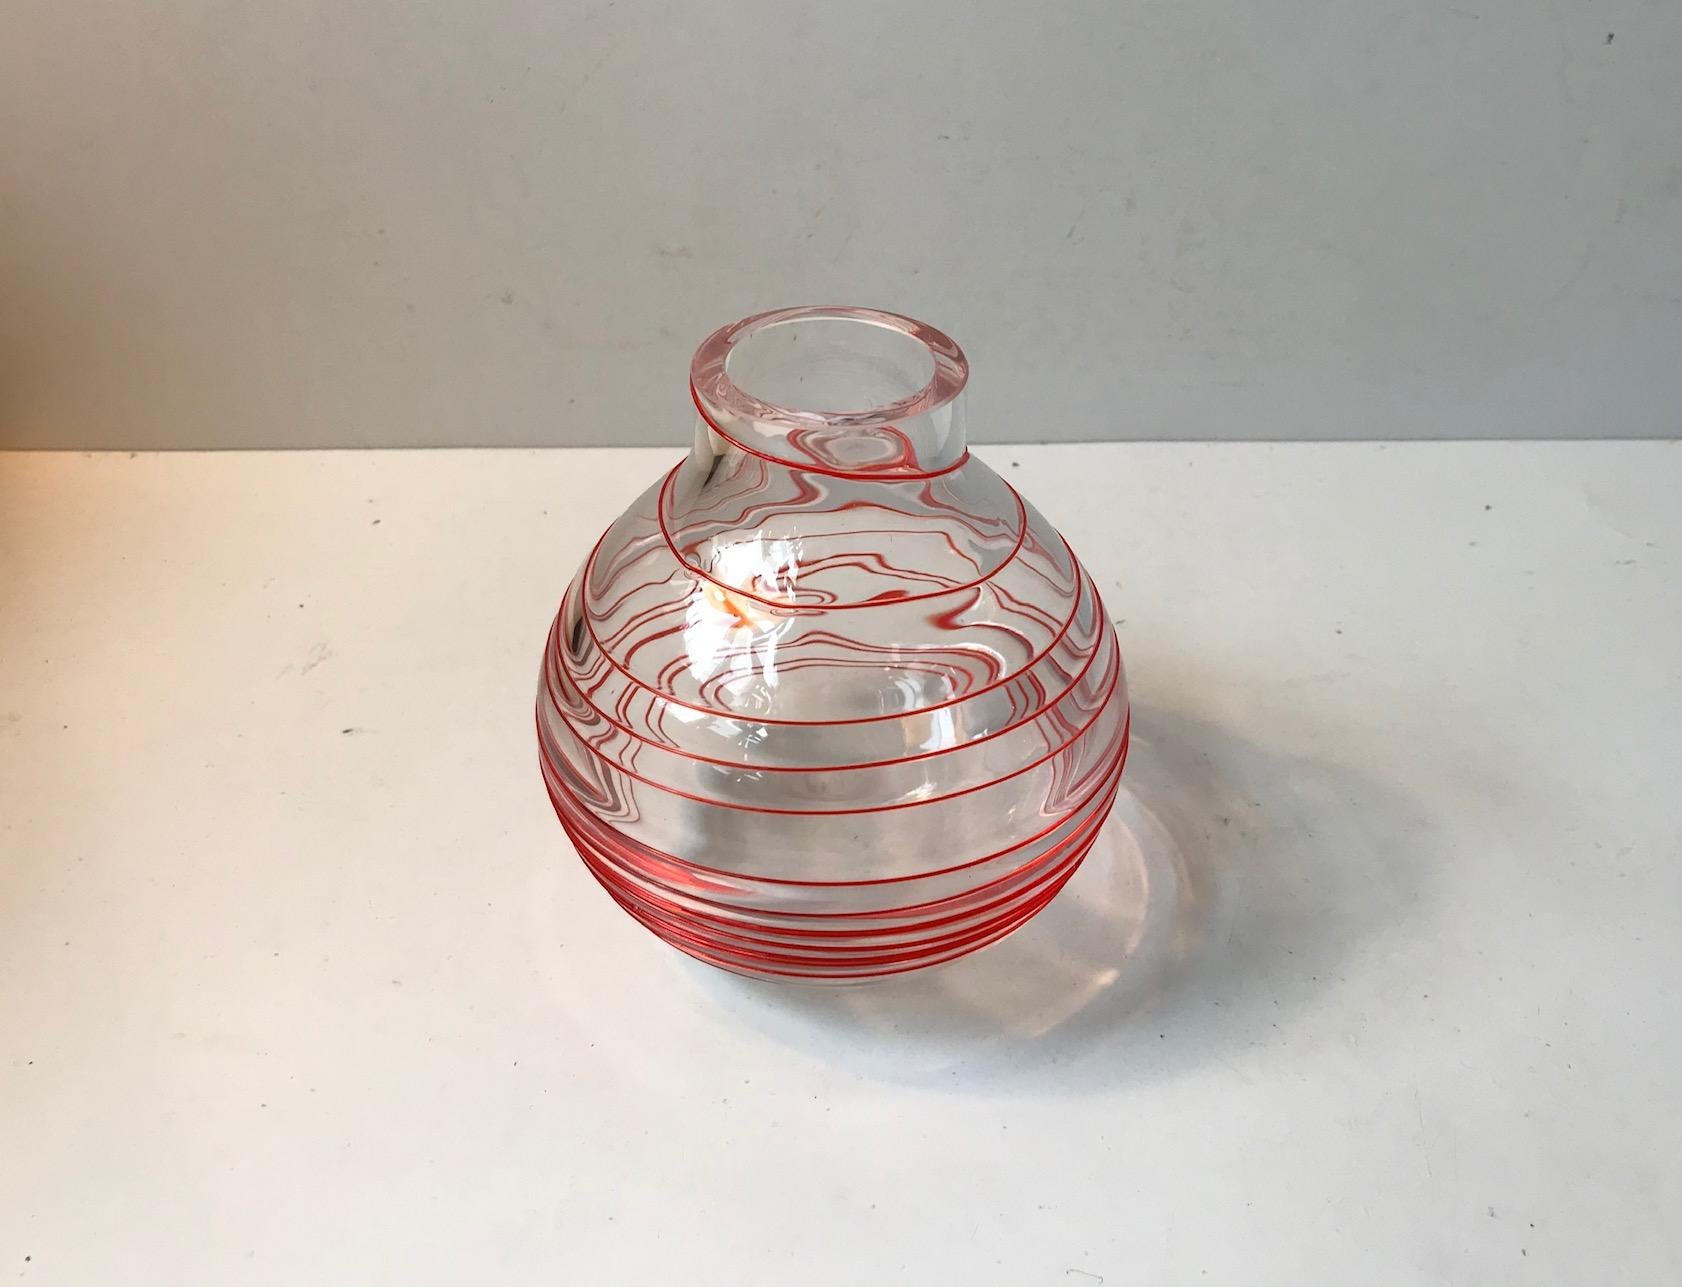 Clear Murano glass vase with overlay red swirl. Manufactured in Venice Italy during the 1960s or 1970s. This design is attributed to Carlo Moretti and inspired the current design of the Nunki vase by Carlo Moretti. Admittedly not executed with its